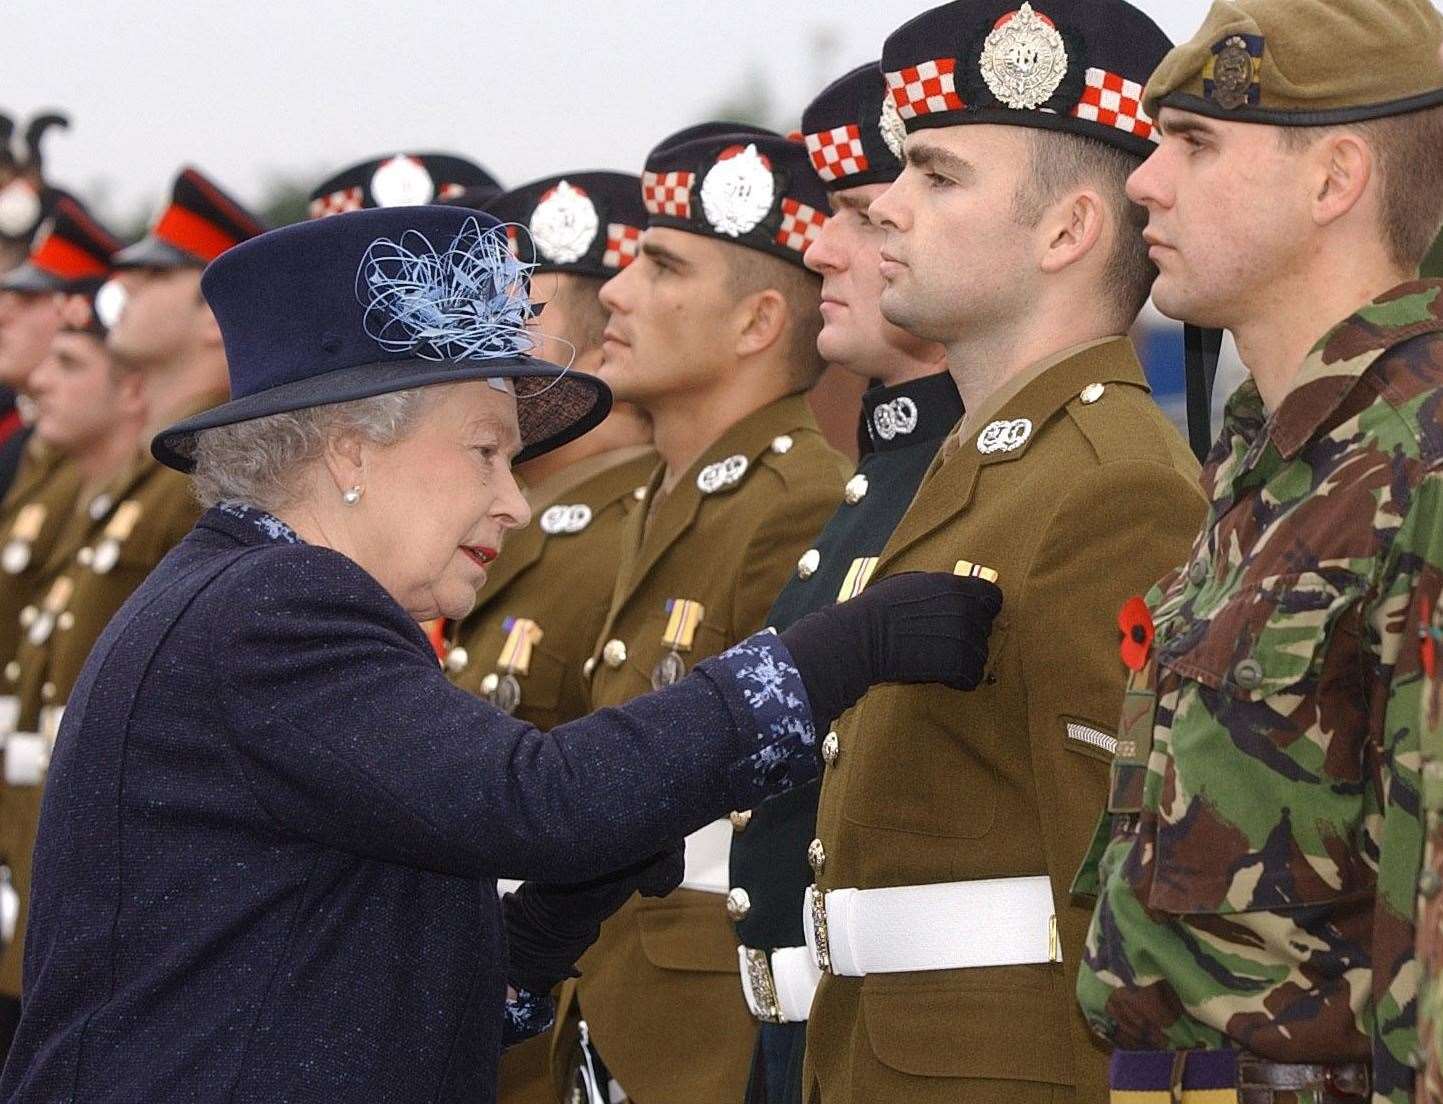 Queen Elizabeth II presents an Operational Service Medal to Lance Corporal Gary Smith at Howe Barracks in Canterbury, Tuesday, November 9, 2004. Picture: Kirsty Wigglesworth PA